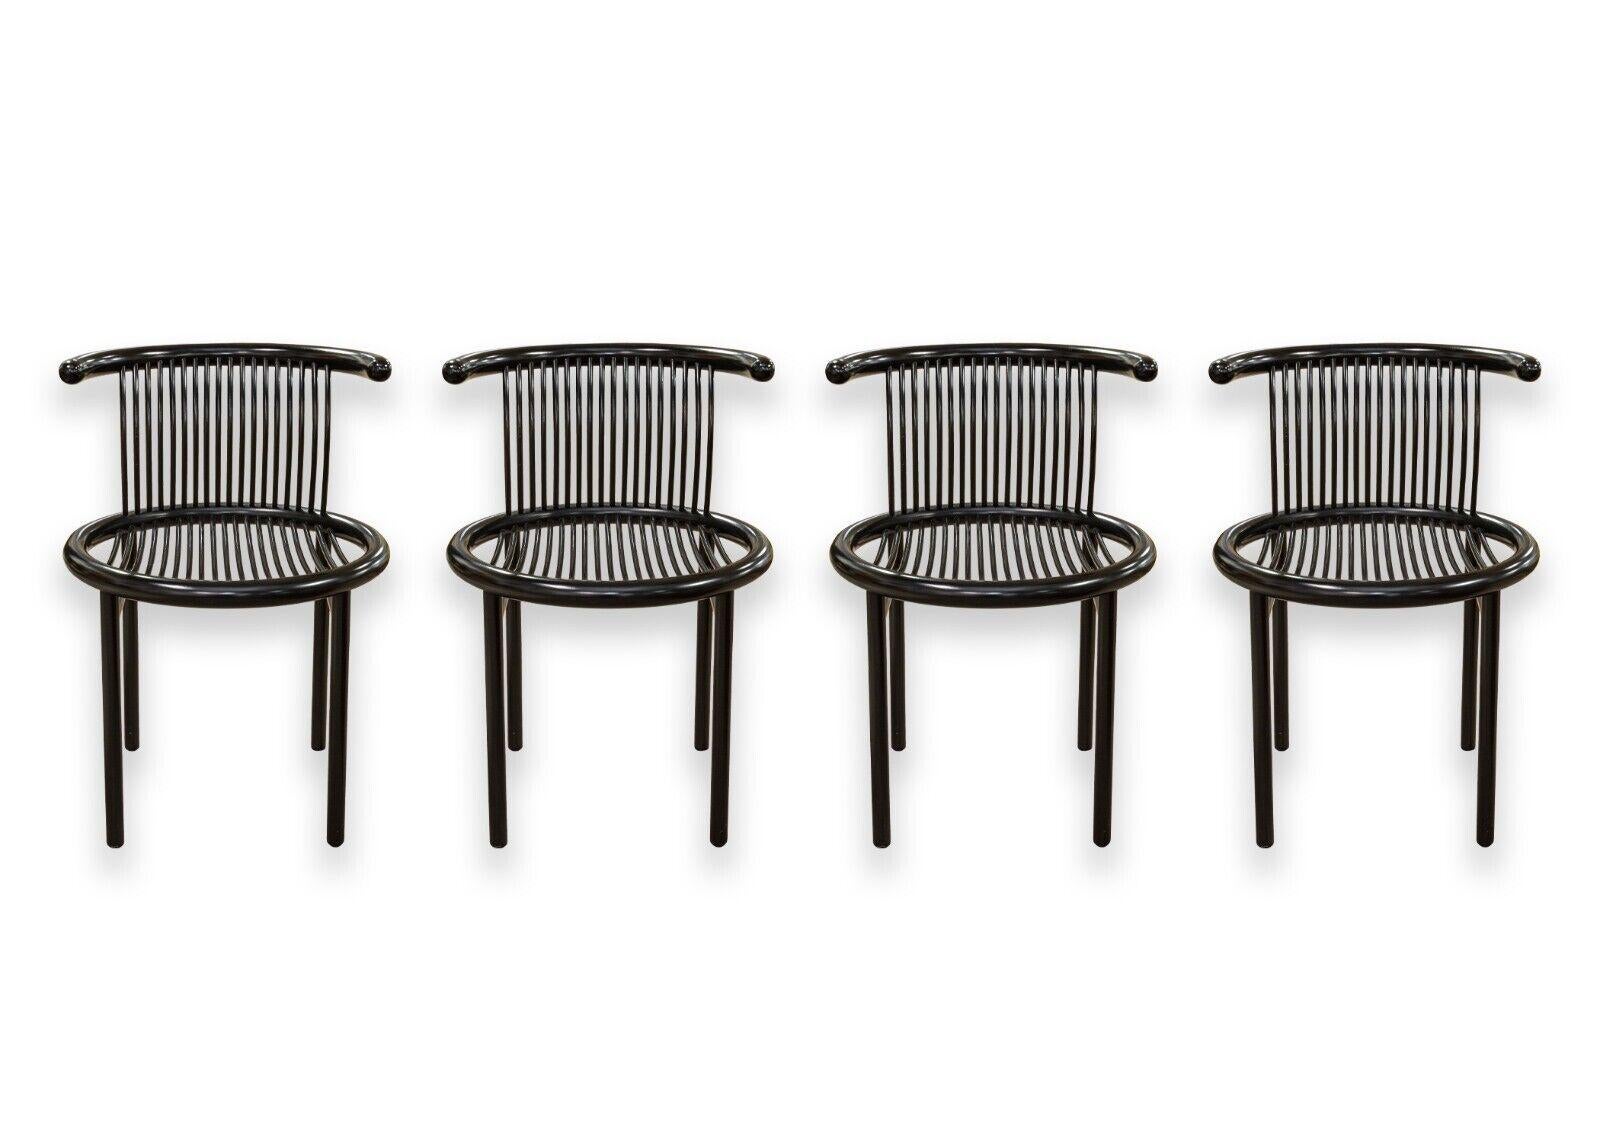 A wonderous post modern dinette set featuring a set of four Lubke chairs and a round Peterson Design dinette table. The set of four chairs are designed by award winning Herbert Ohl for Lubke. This model is titled the 